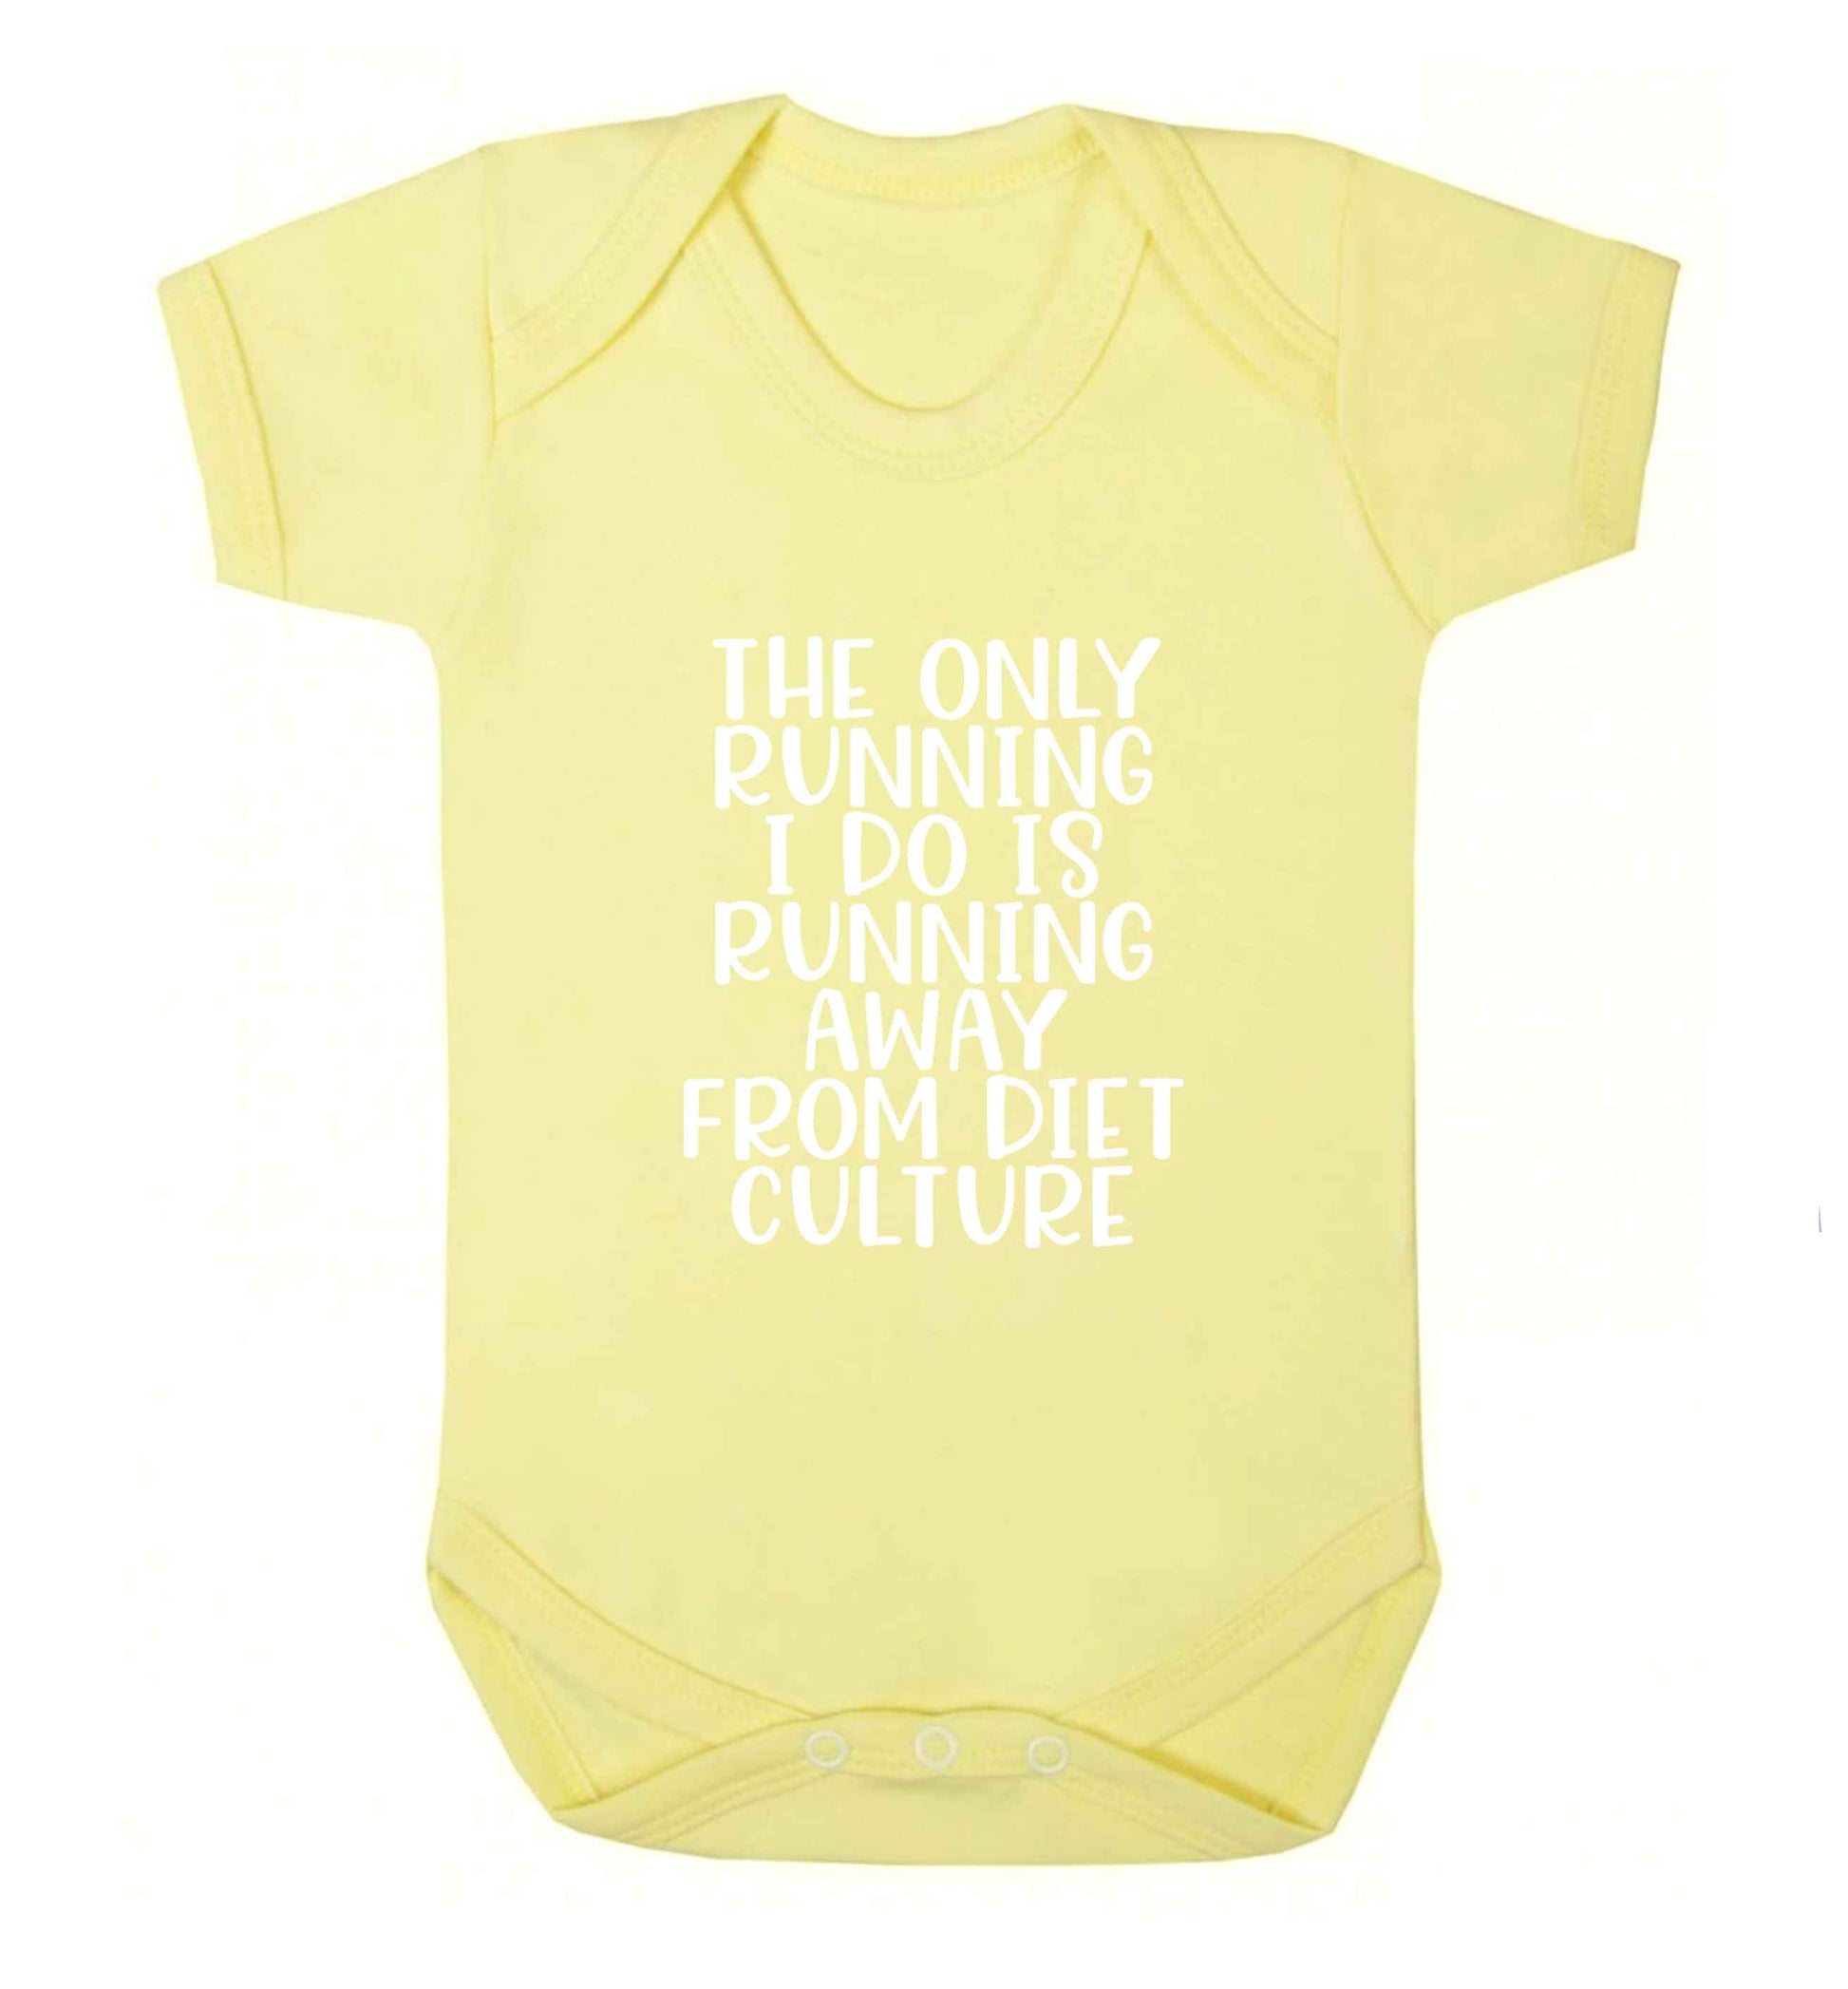 The only running I do is running away from diet culture baby vest pale yellow 18-24 months